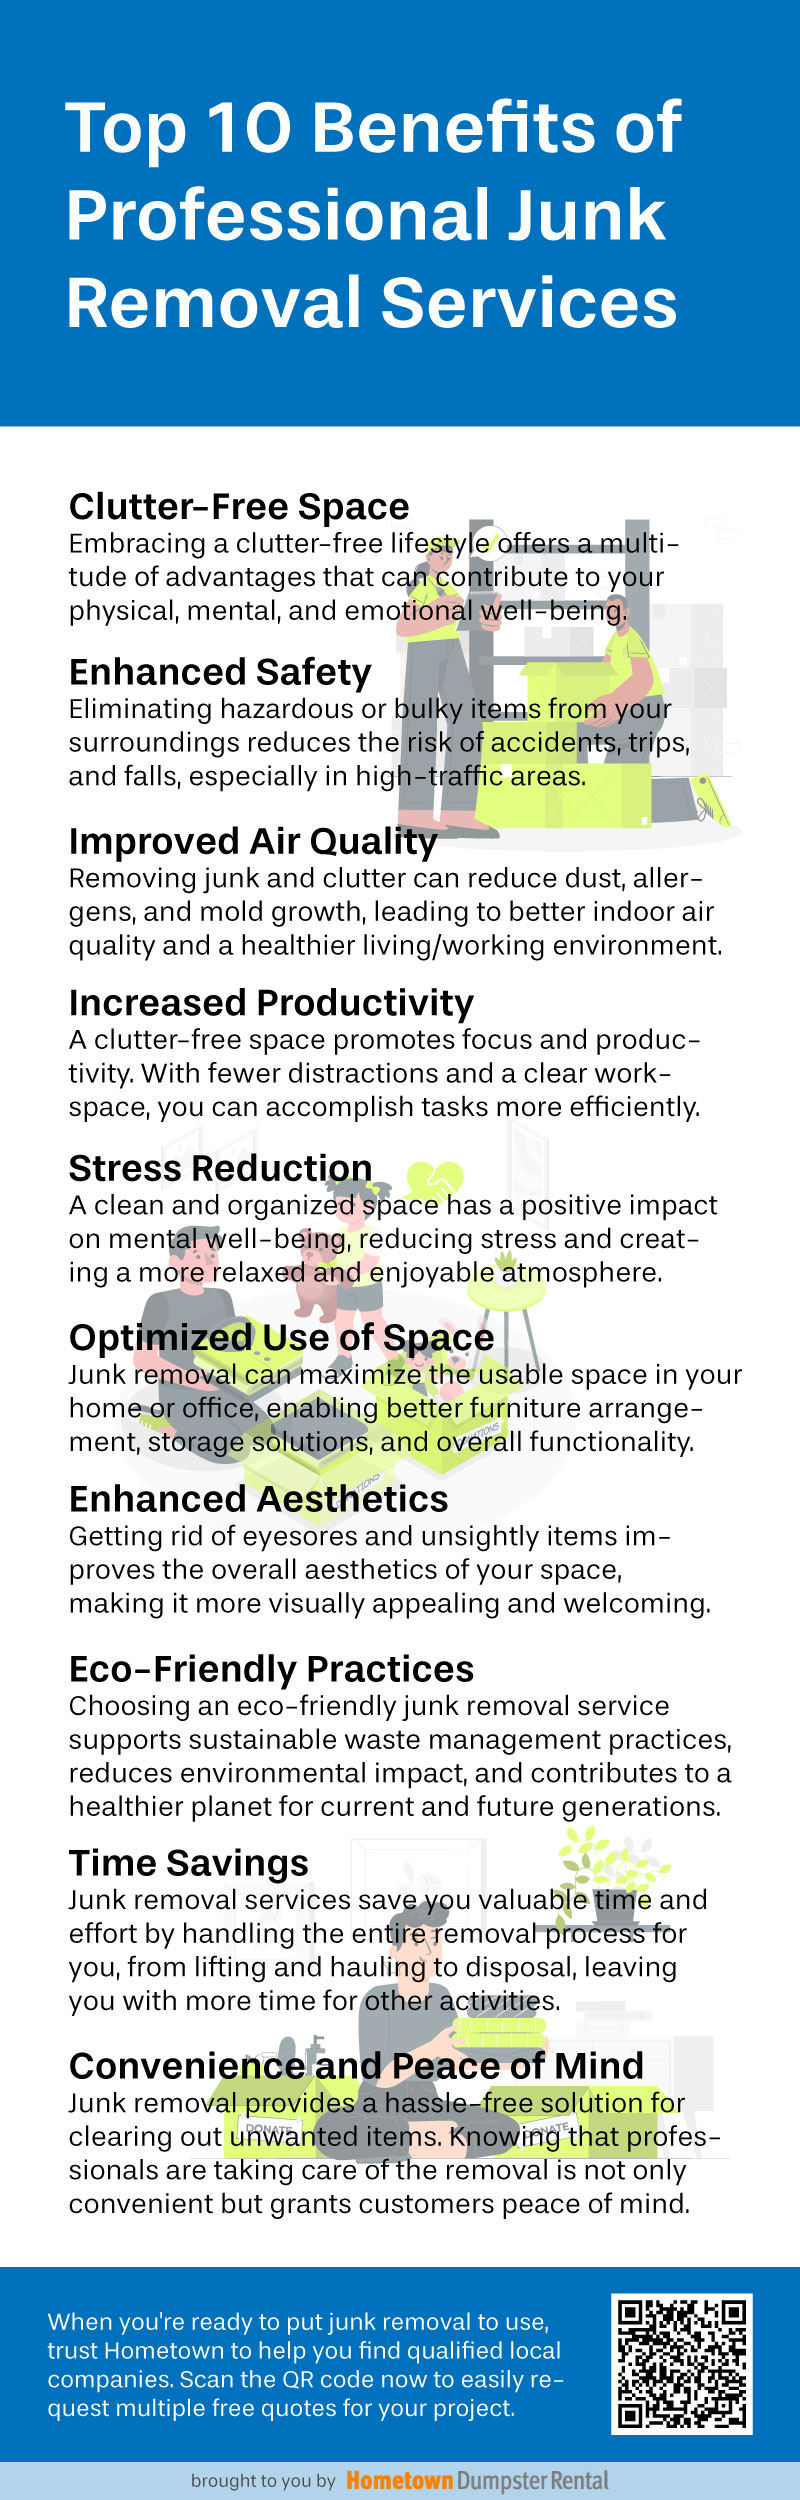 infographic listing top 10 junk removal benefits